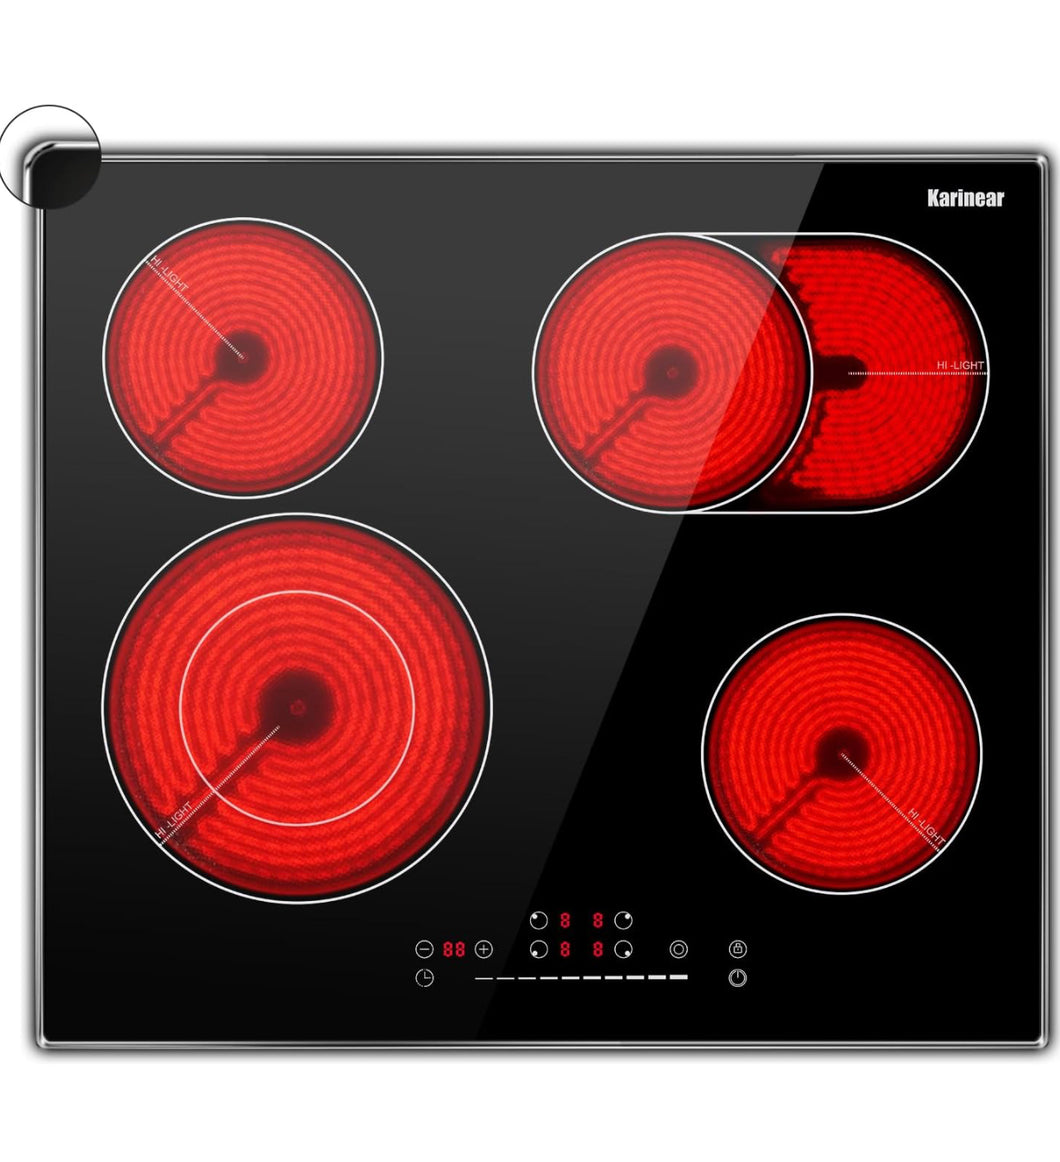 Karinear 4 Burners Electric Cooktop 24 Inch, 220-240v Built-in Electric Ceramic Cooktop with Glass Protection Metal Frame, Expandable Burners, Slider-Touch Control, Multi-function Elecric Stovetop!